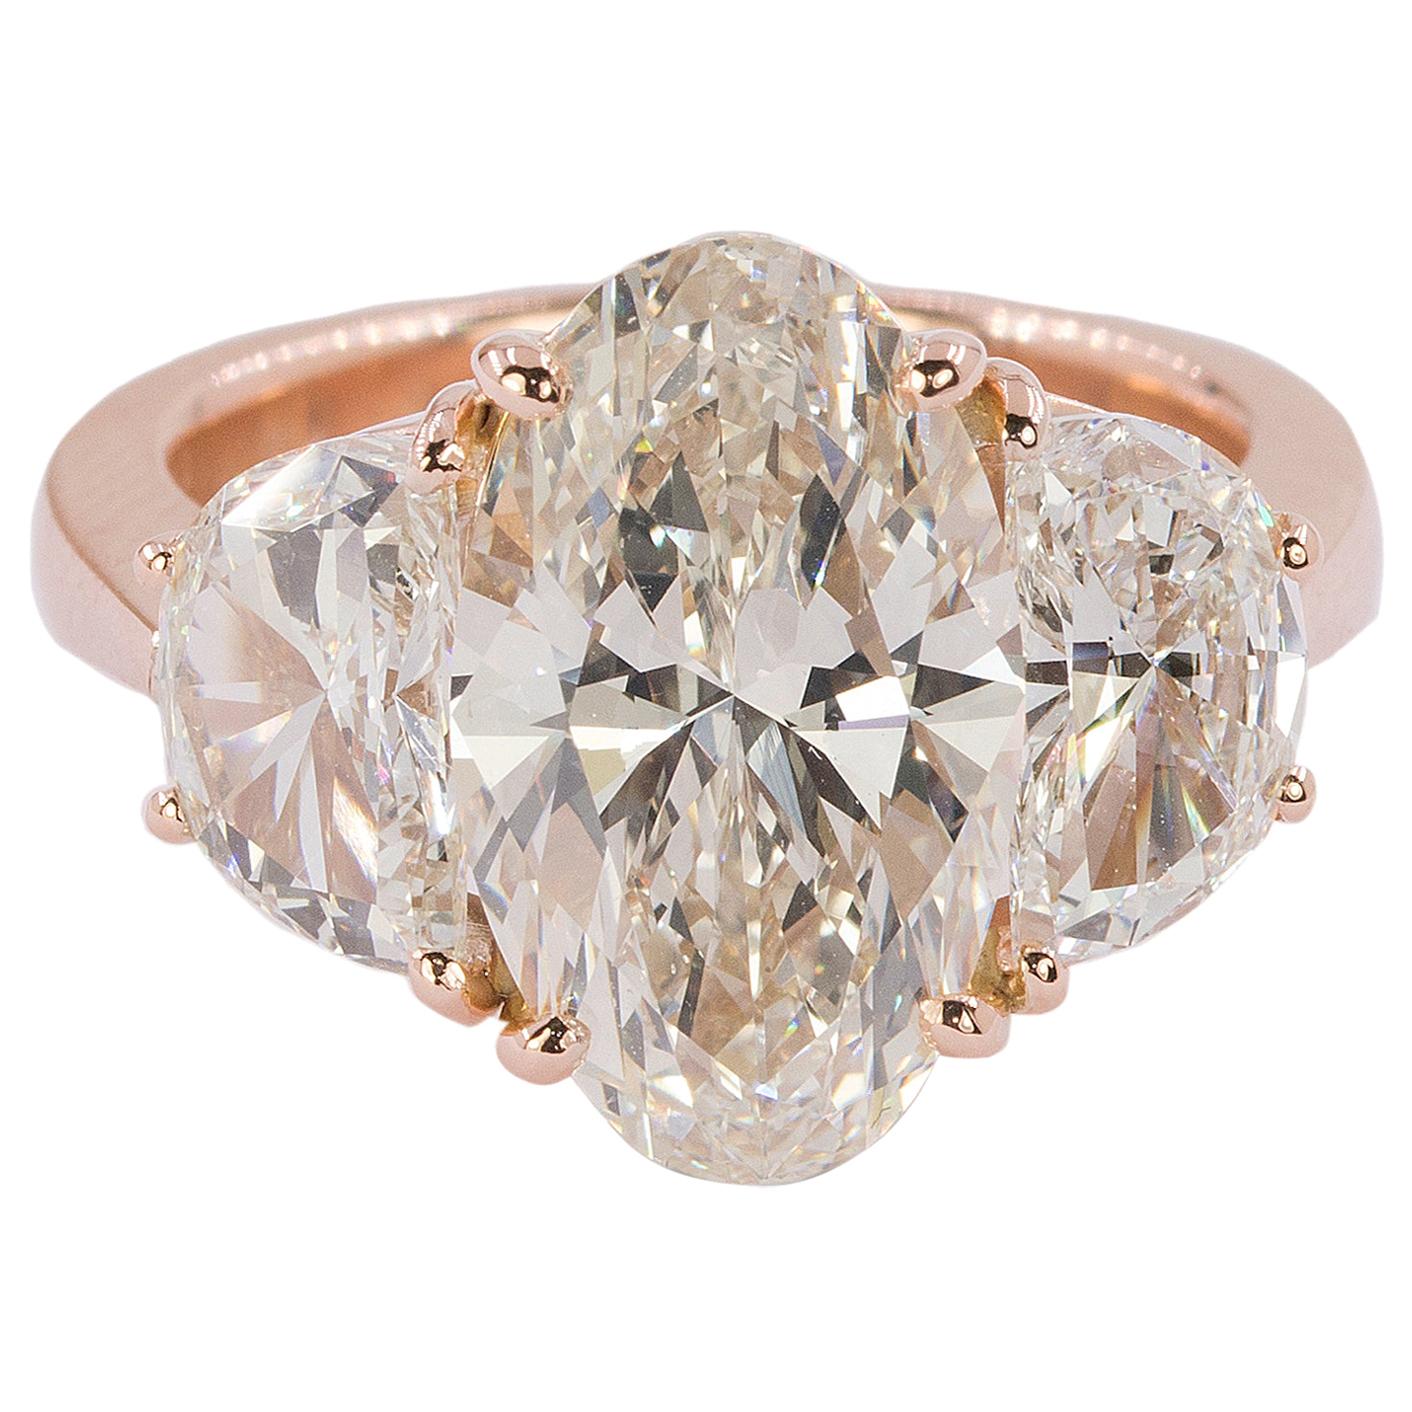 Magnificent 18k Rose Gold 6.73 Total Weight Diamond Ring